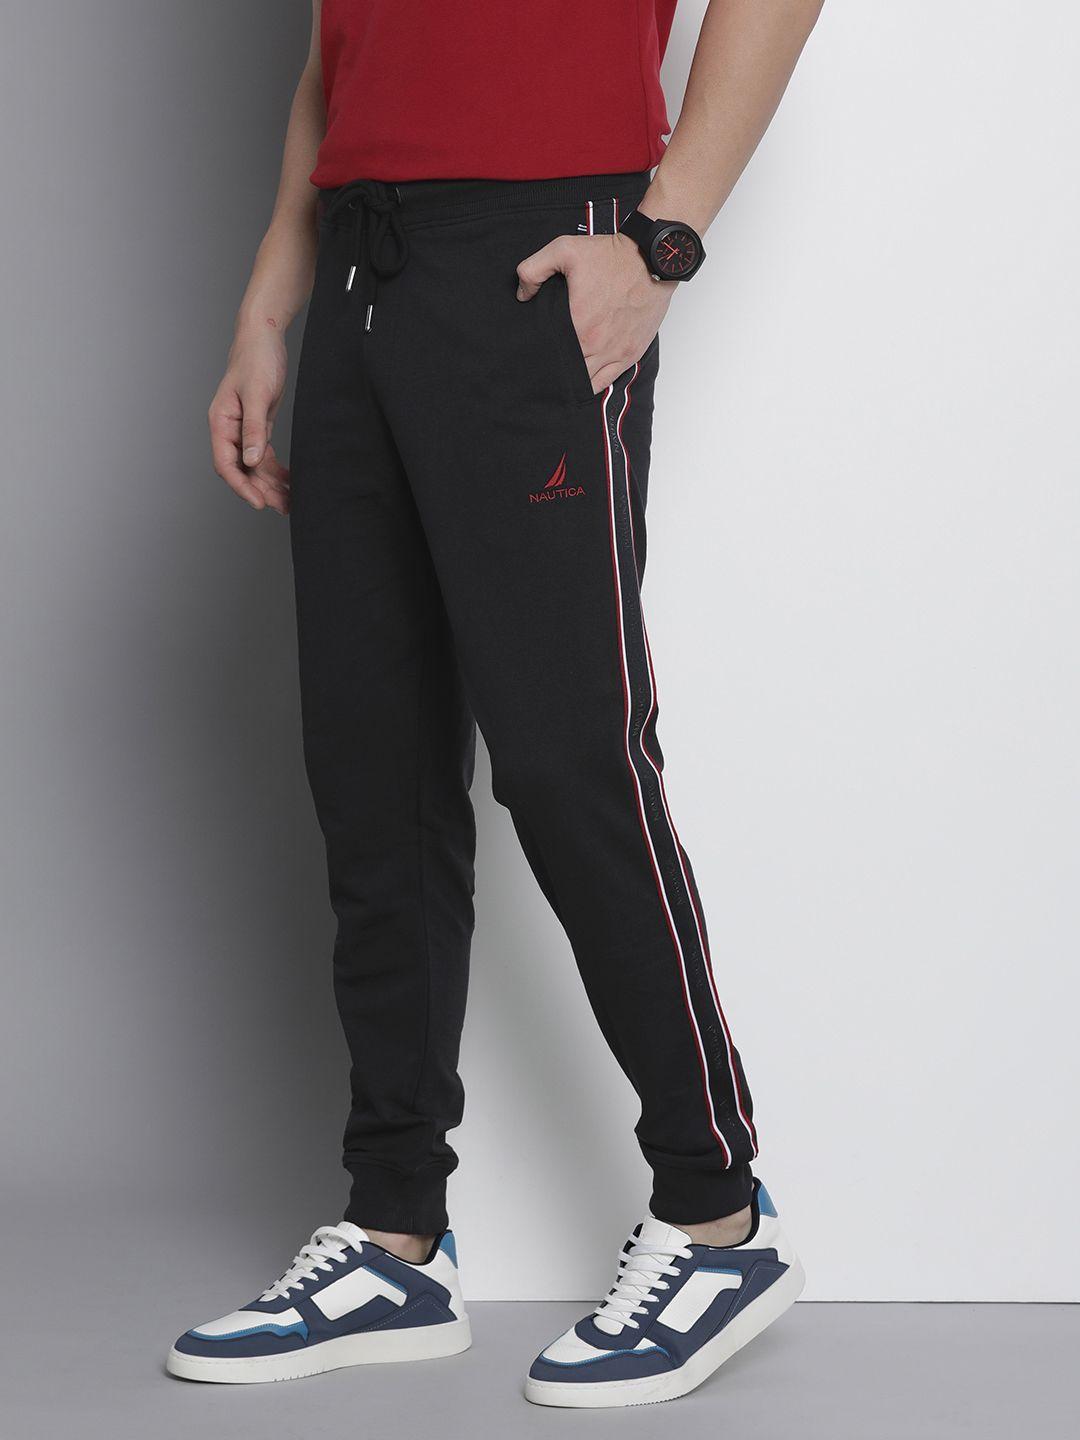 nautica men joggers with side taping detail